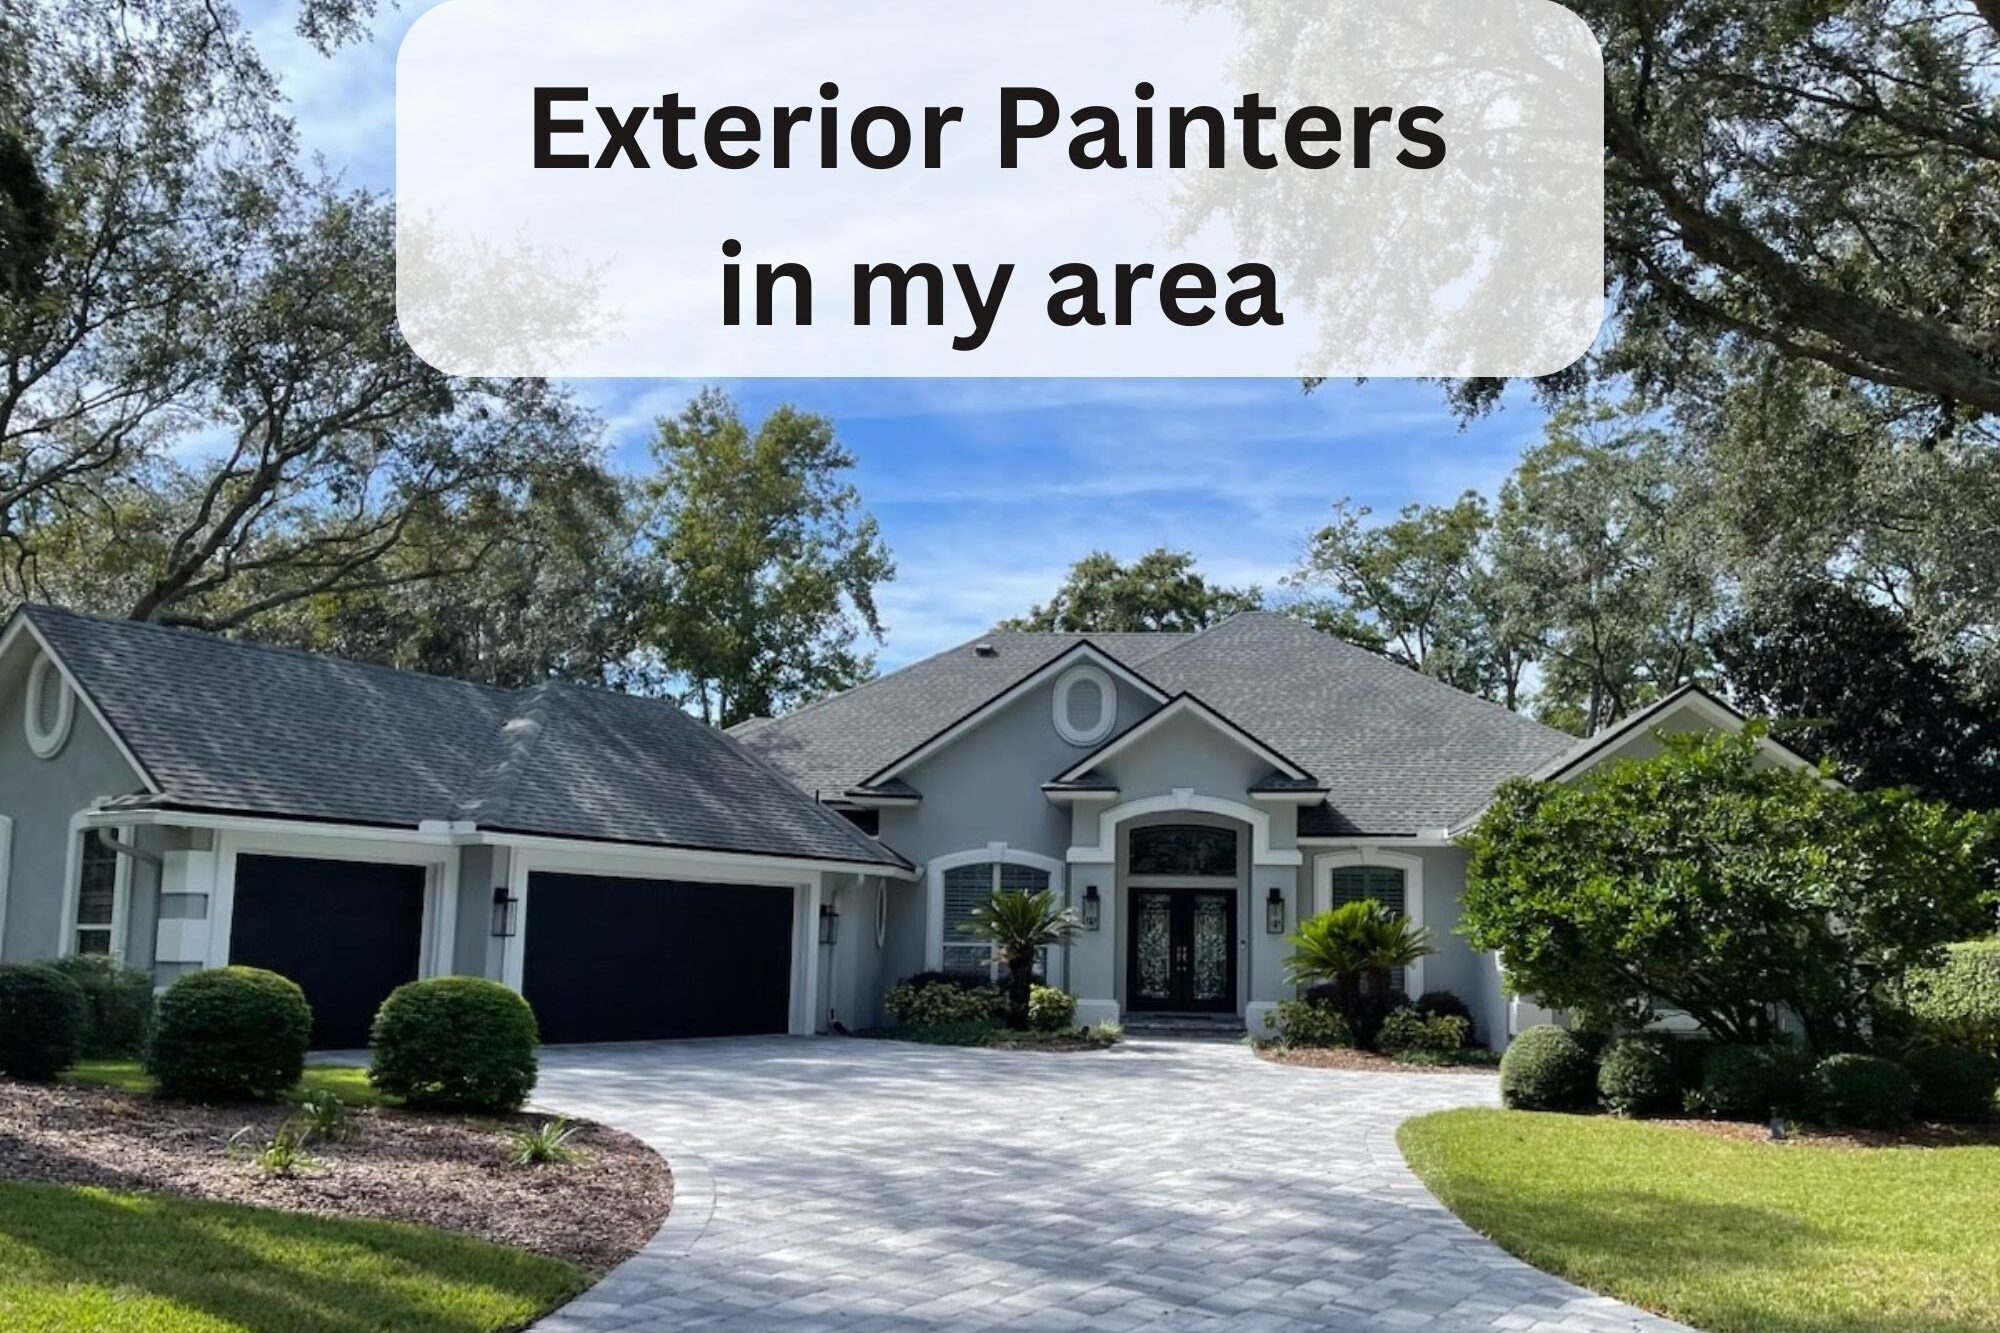 How Long Does Exterior House Paint Last?